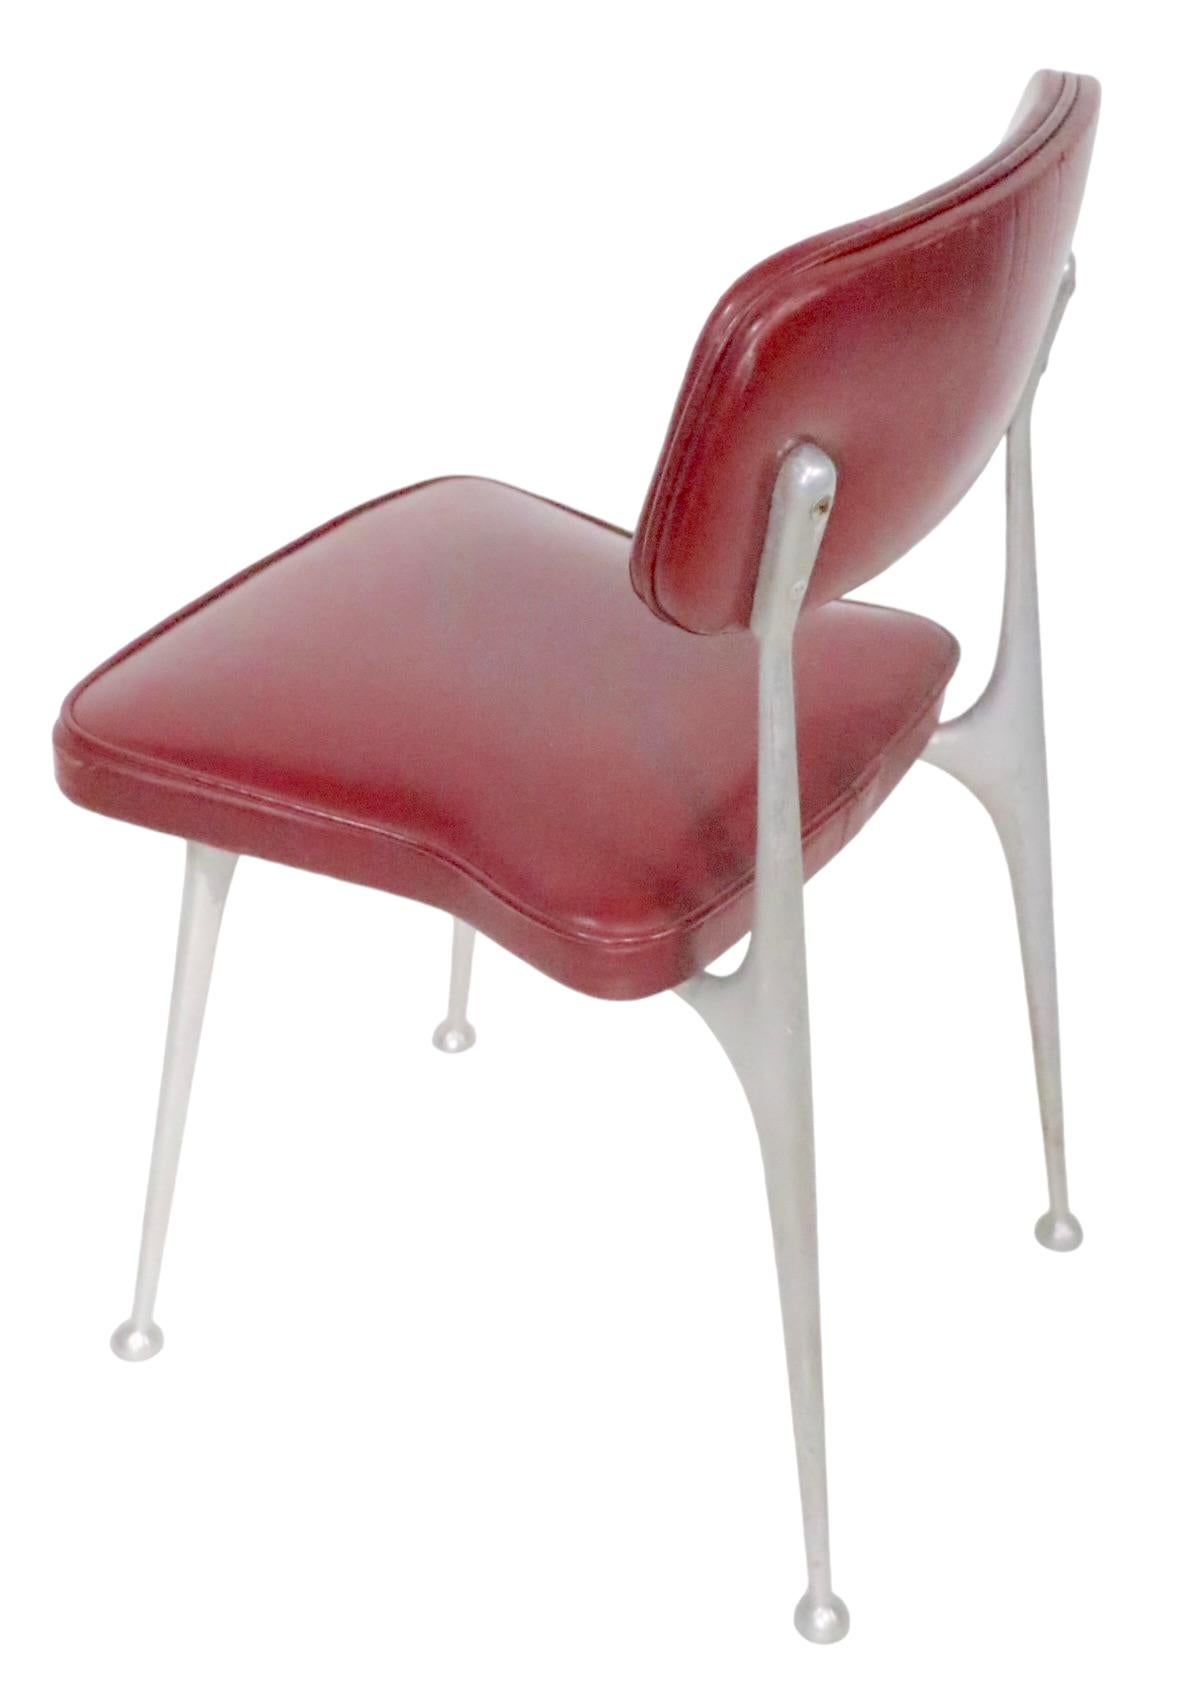 Shelby Williams Gazelle Cast Aluminum and Vinyl Chair, circa 1960s In Good Condition For Sale In New York, NY